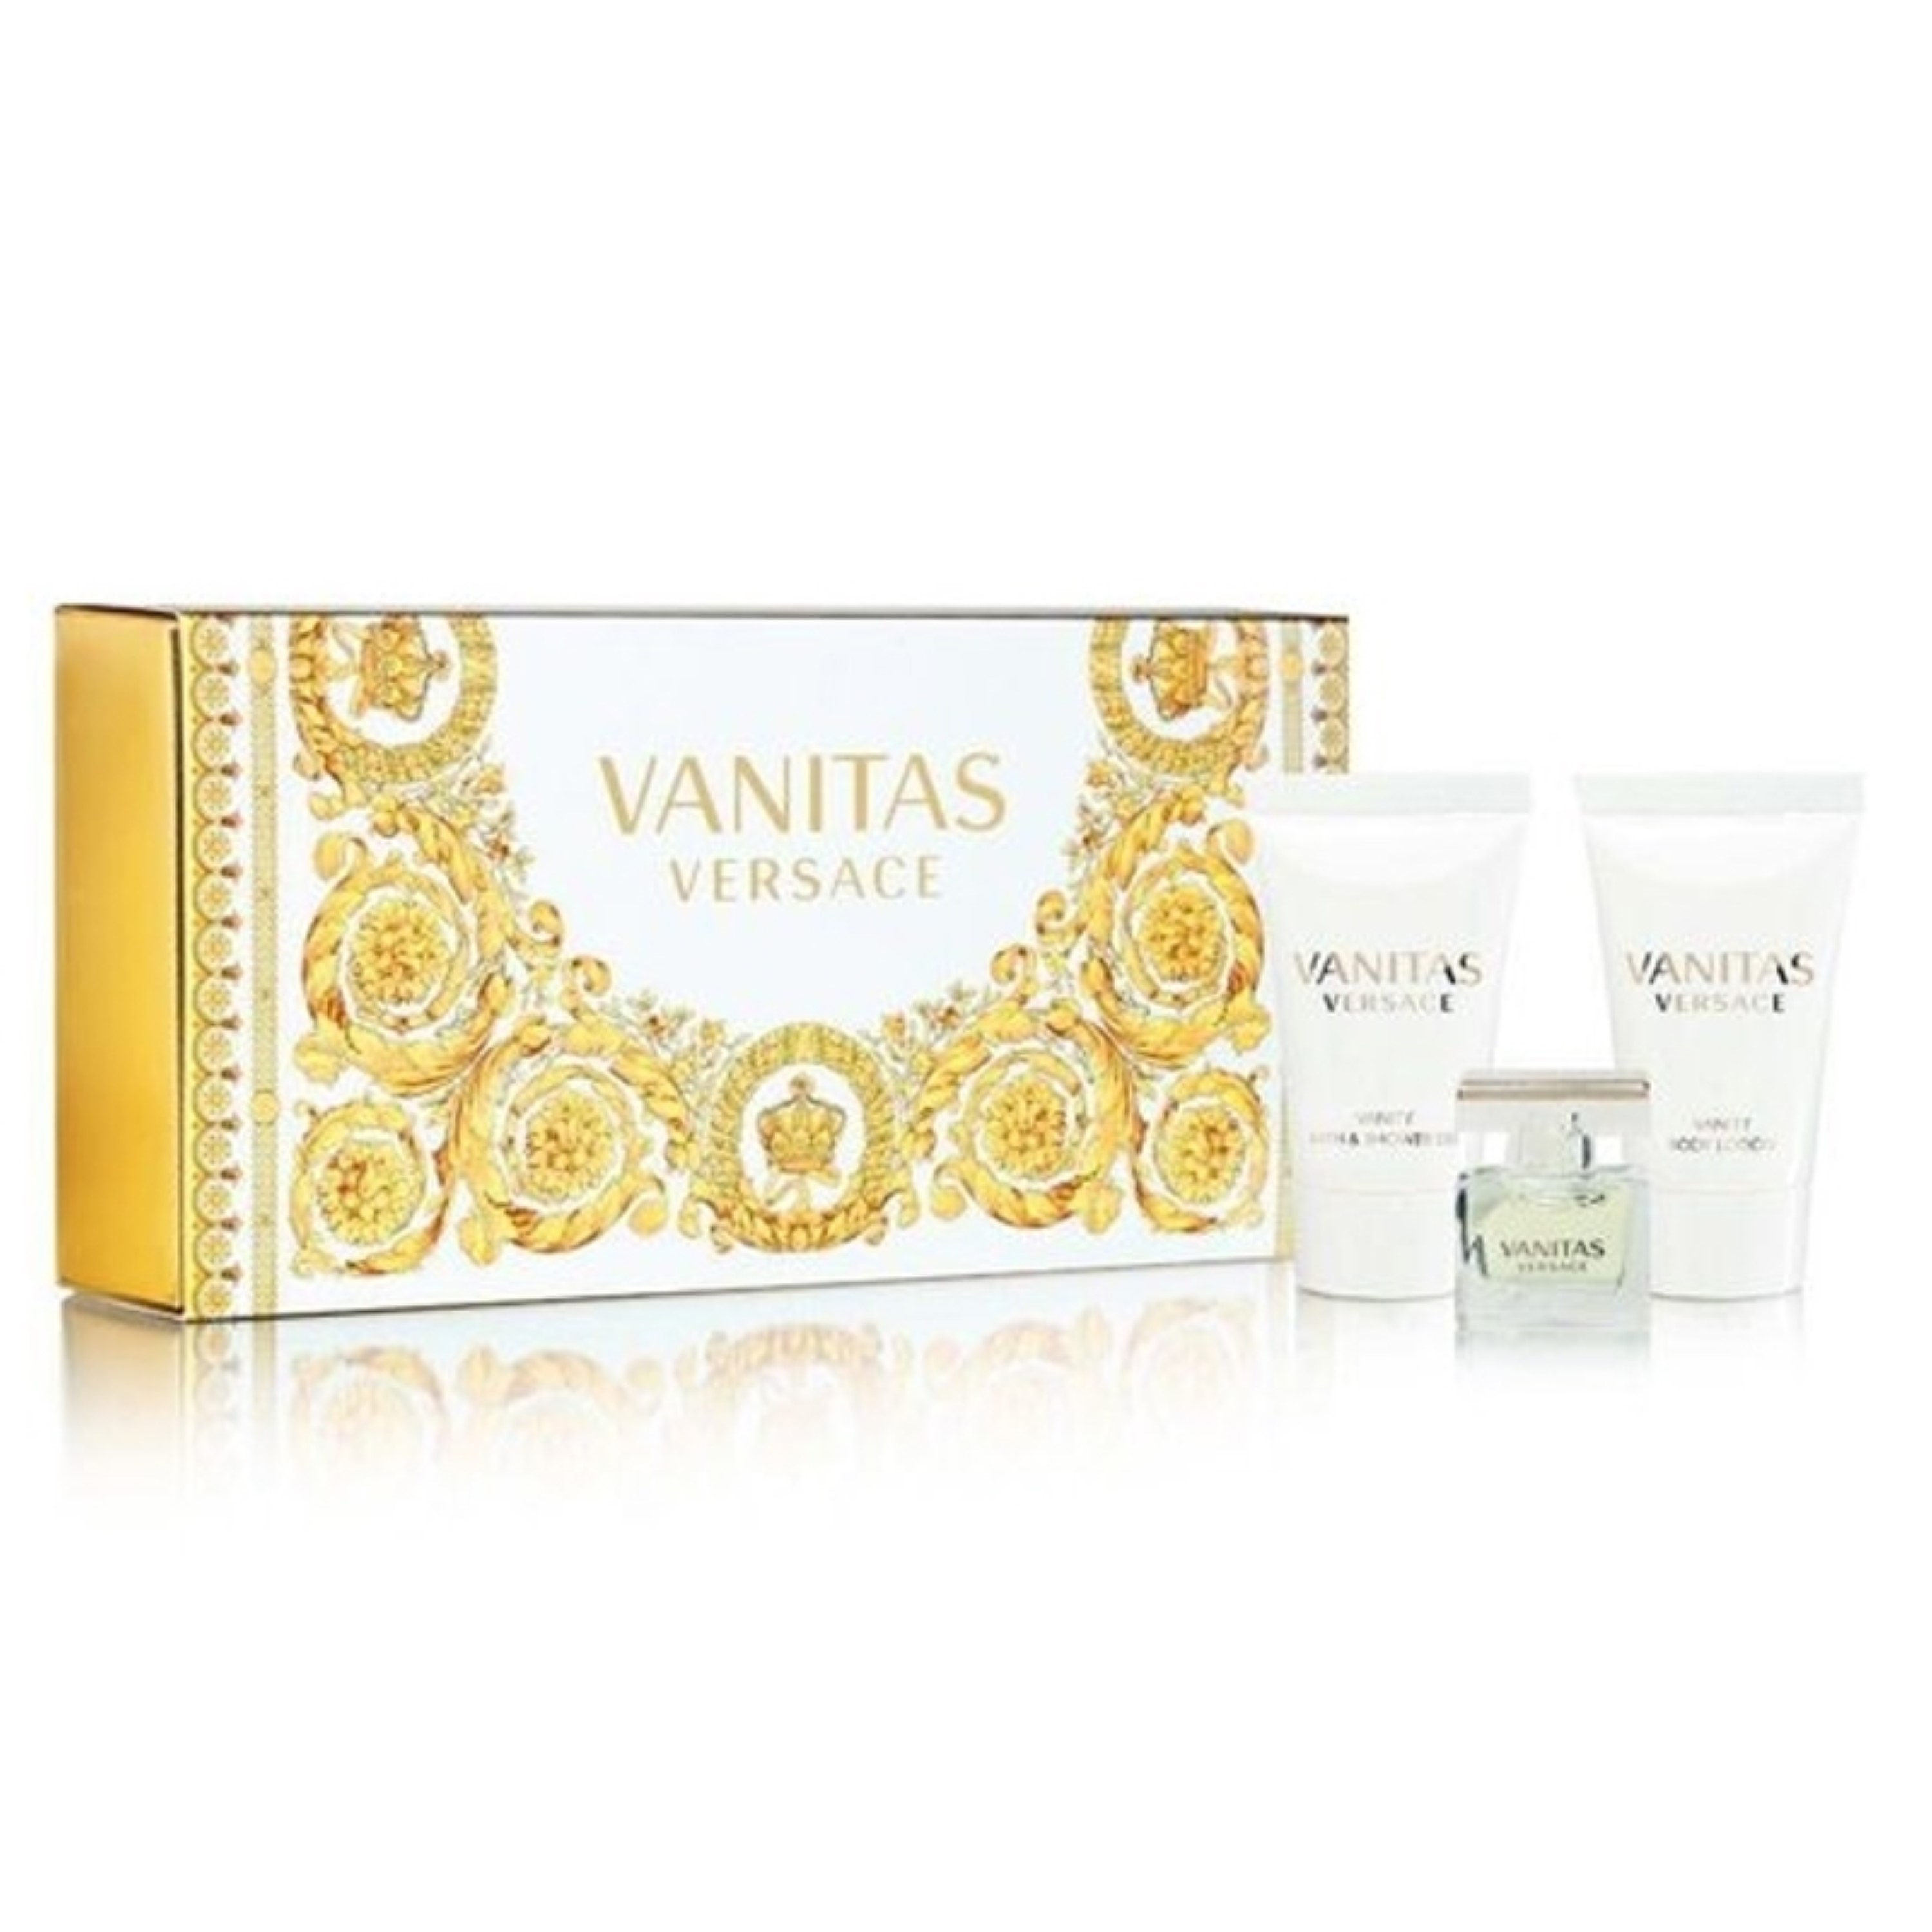 Versace Vanitas EDT 4.5 ml And 25 ml Shower Gel And 25 Body Lotion Miniature Set For Women Wholesale | Tradeling